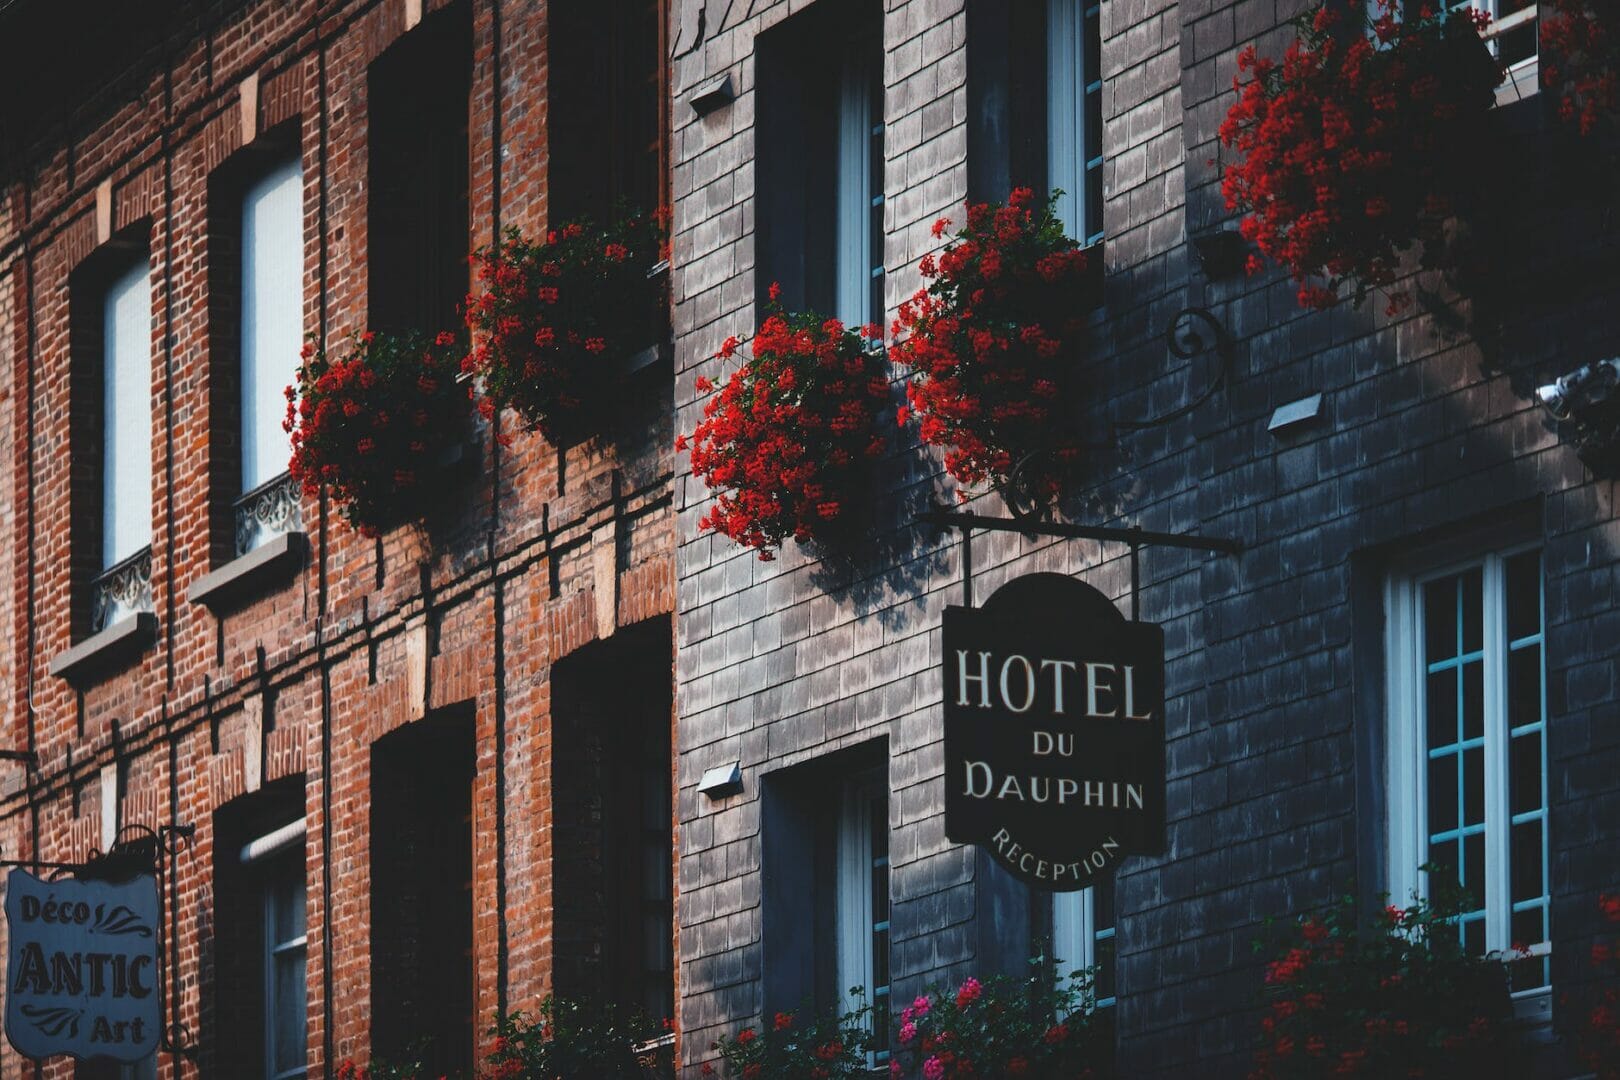 facade of modern masonry building decorated with red flowers - Europe Travel Tips